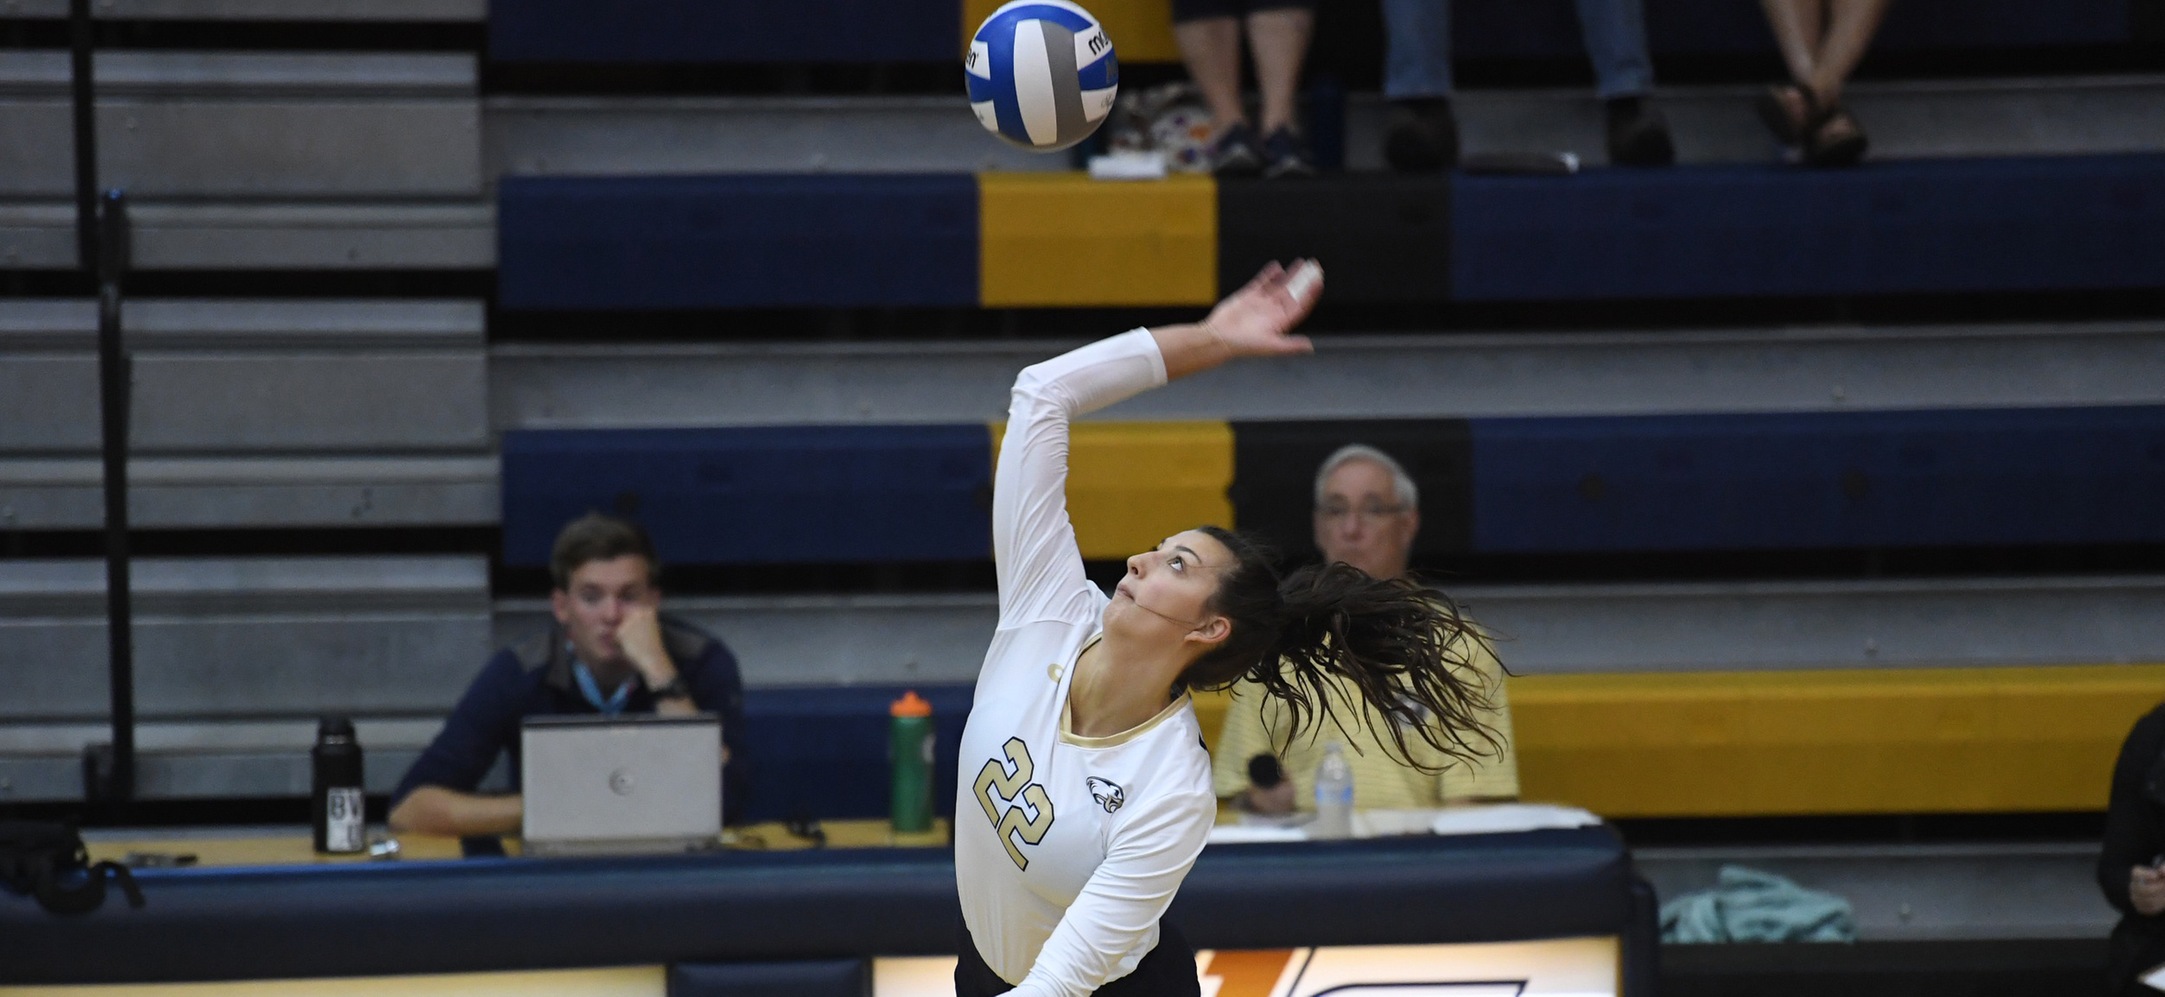 Morgan Edwards was named to the ASICS All-Tournament as she helped the Eagles to a 2-1 record over the weekend.